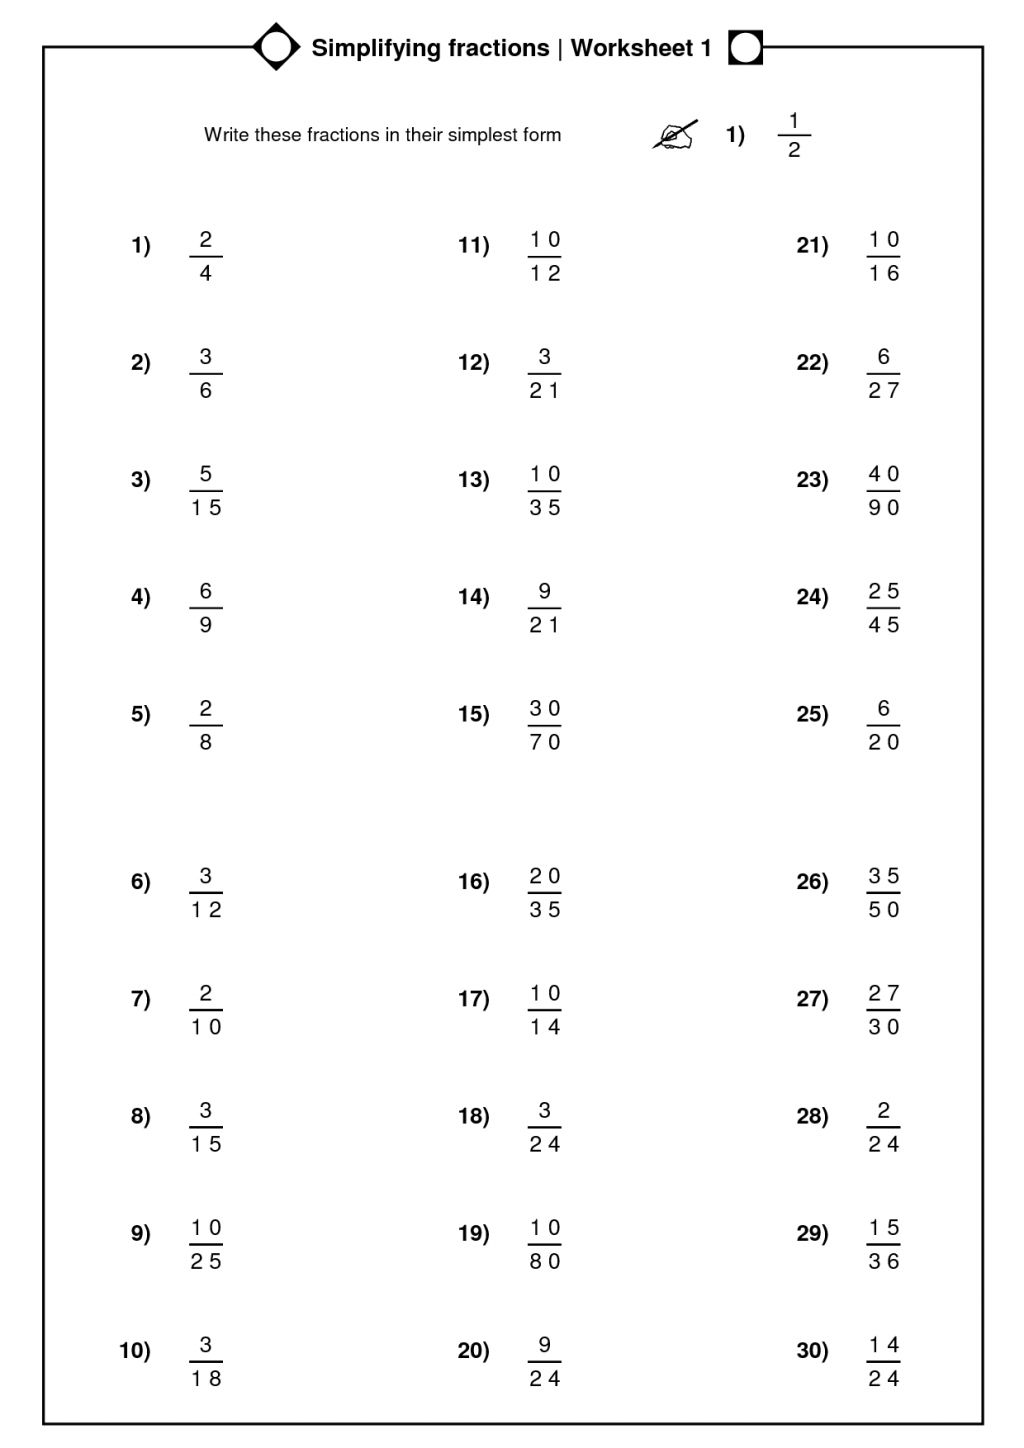 Simplifying Fractions Worksheet With Answers db excel com